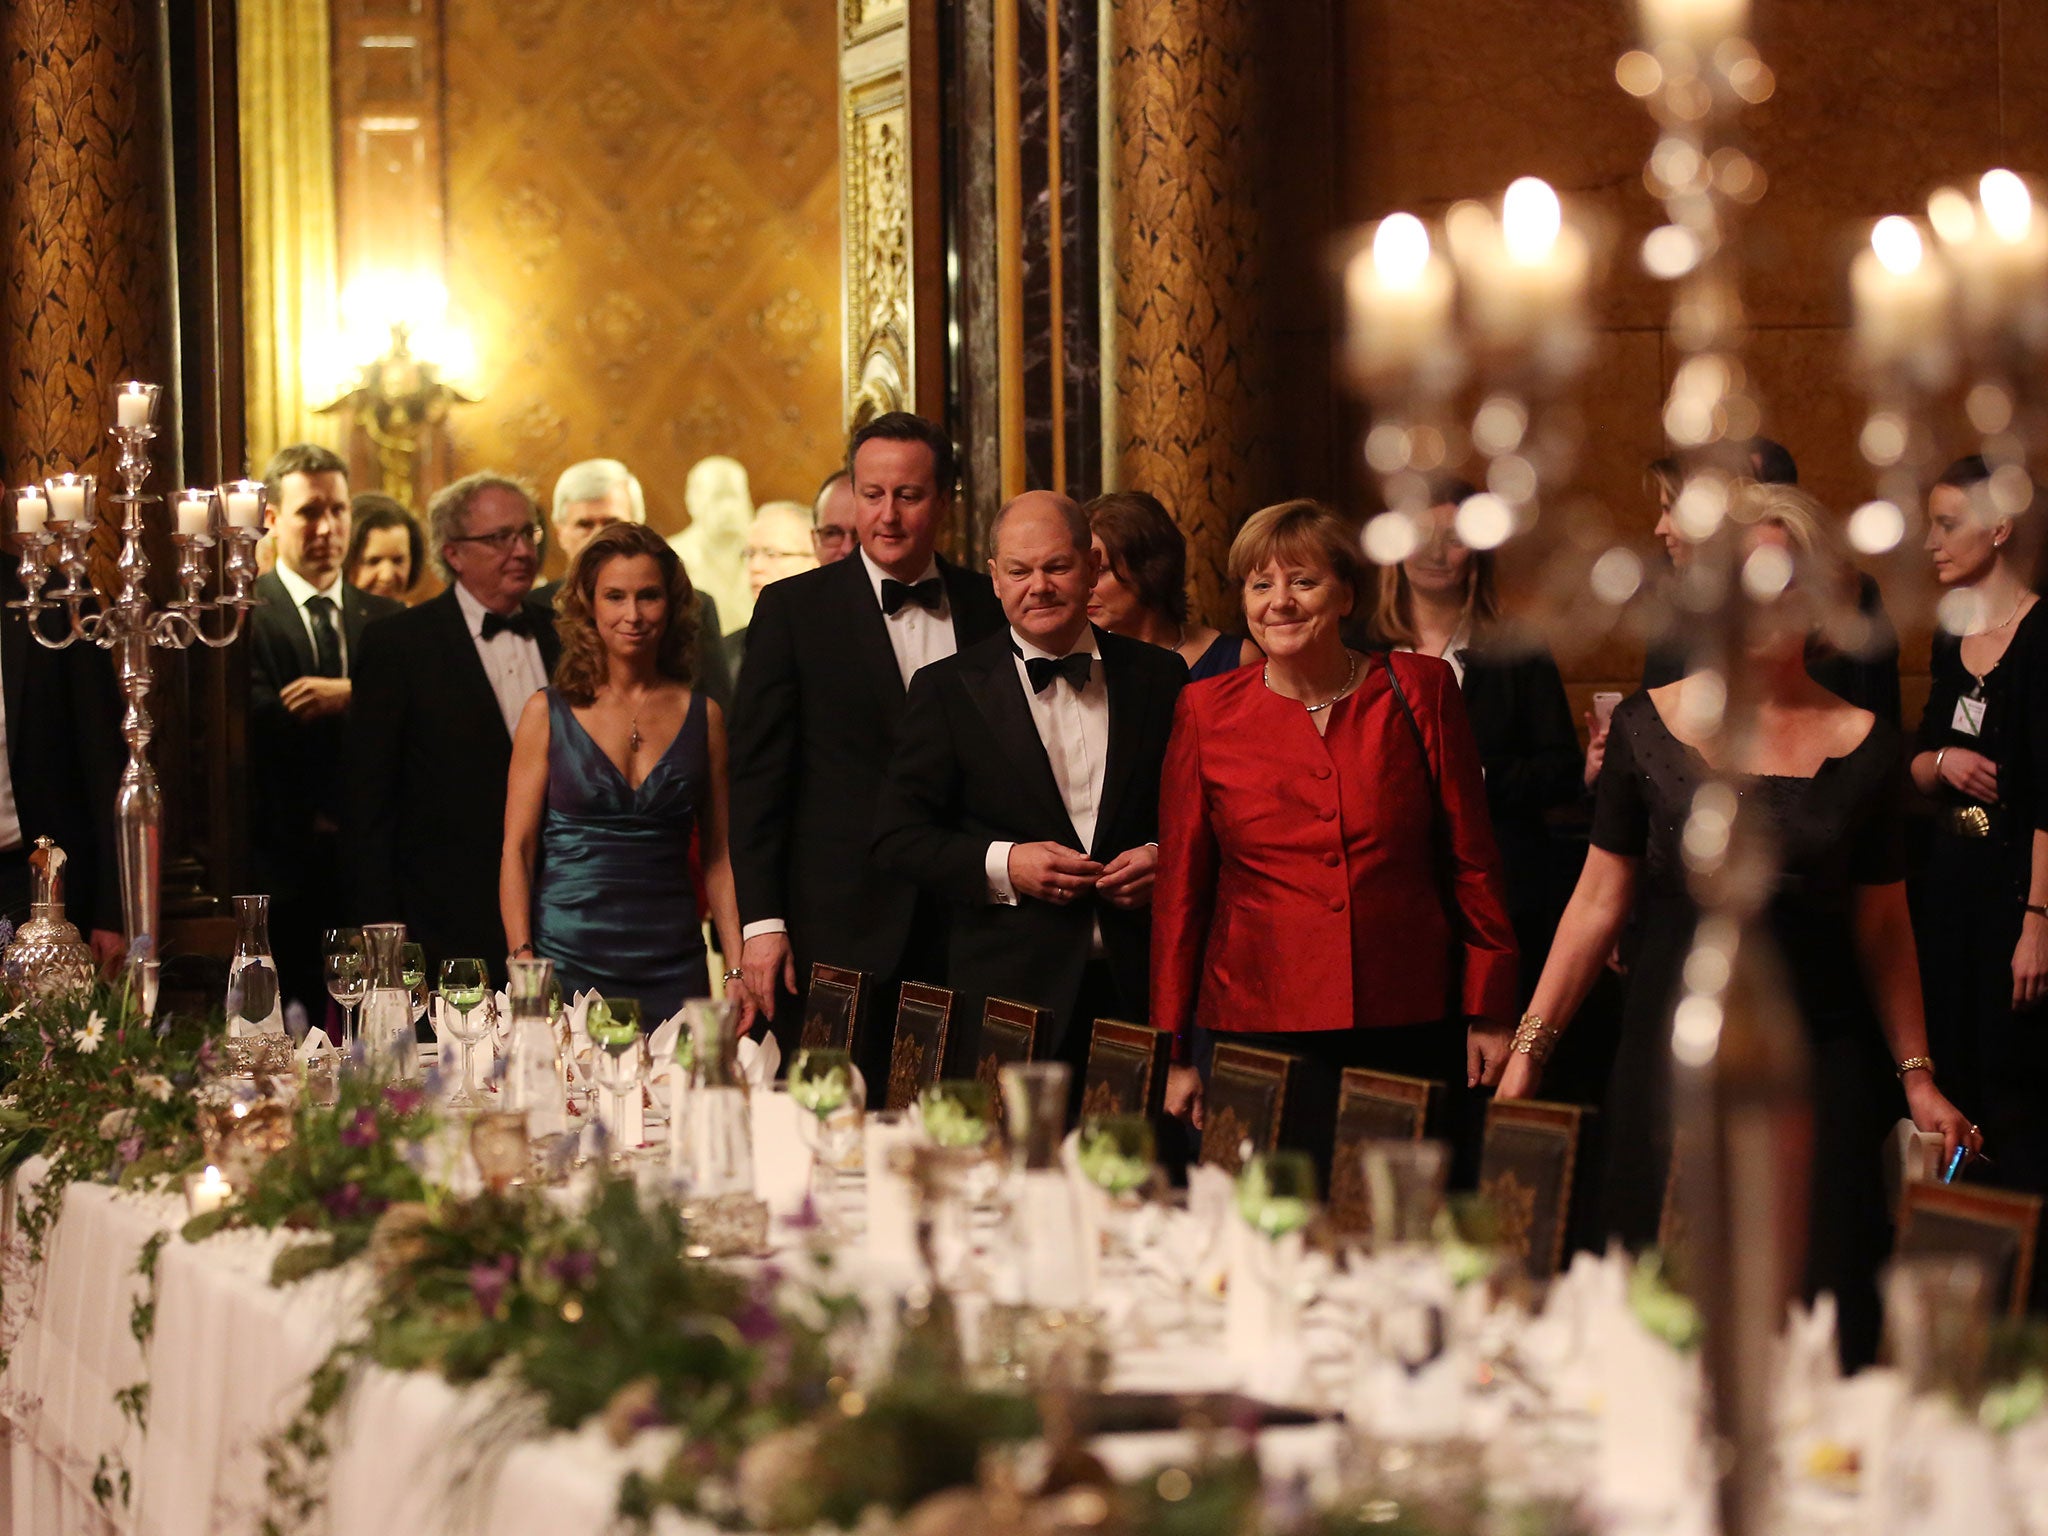 Pro-EU: David Cameron arrives with local mayor Olaf Scholz and Angela Merkel at a formal dinner in Hamburg’s city hall